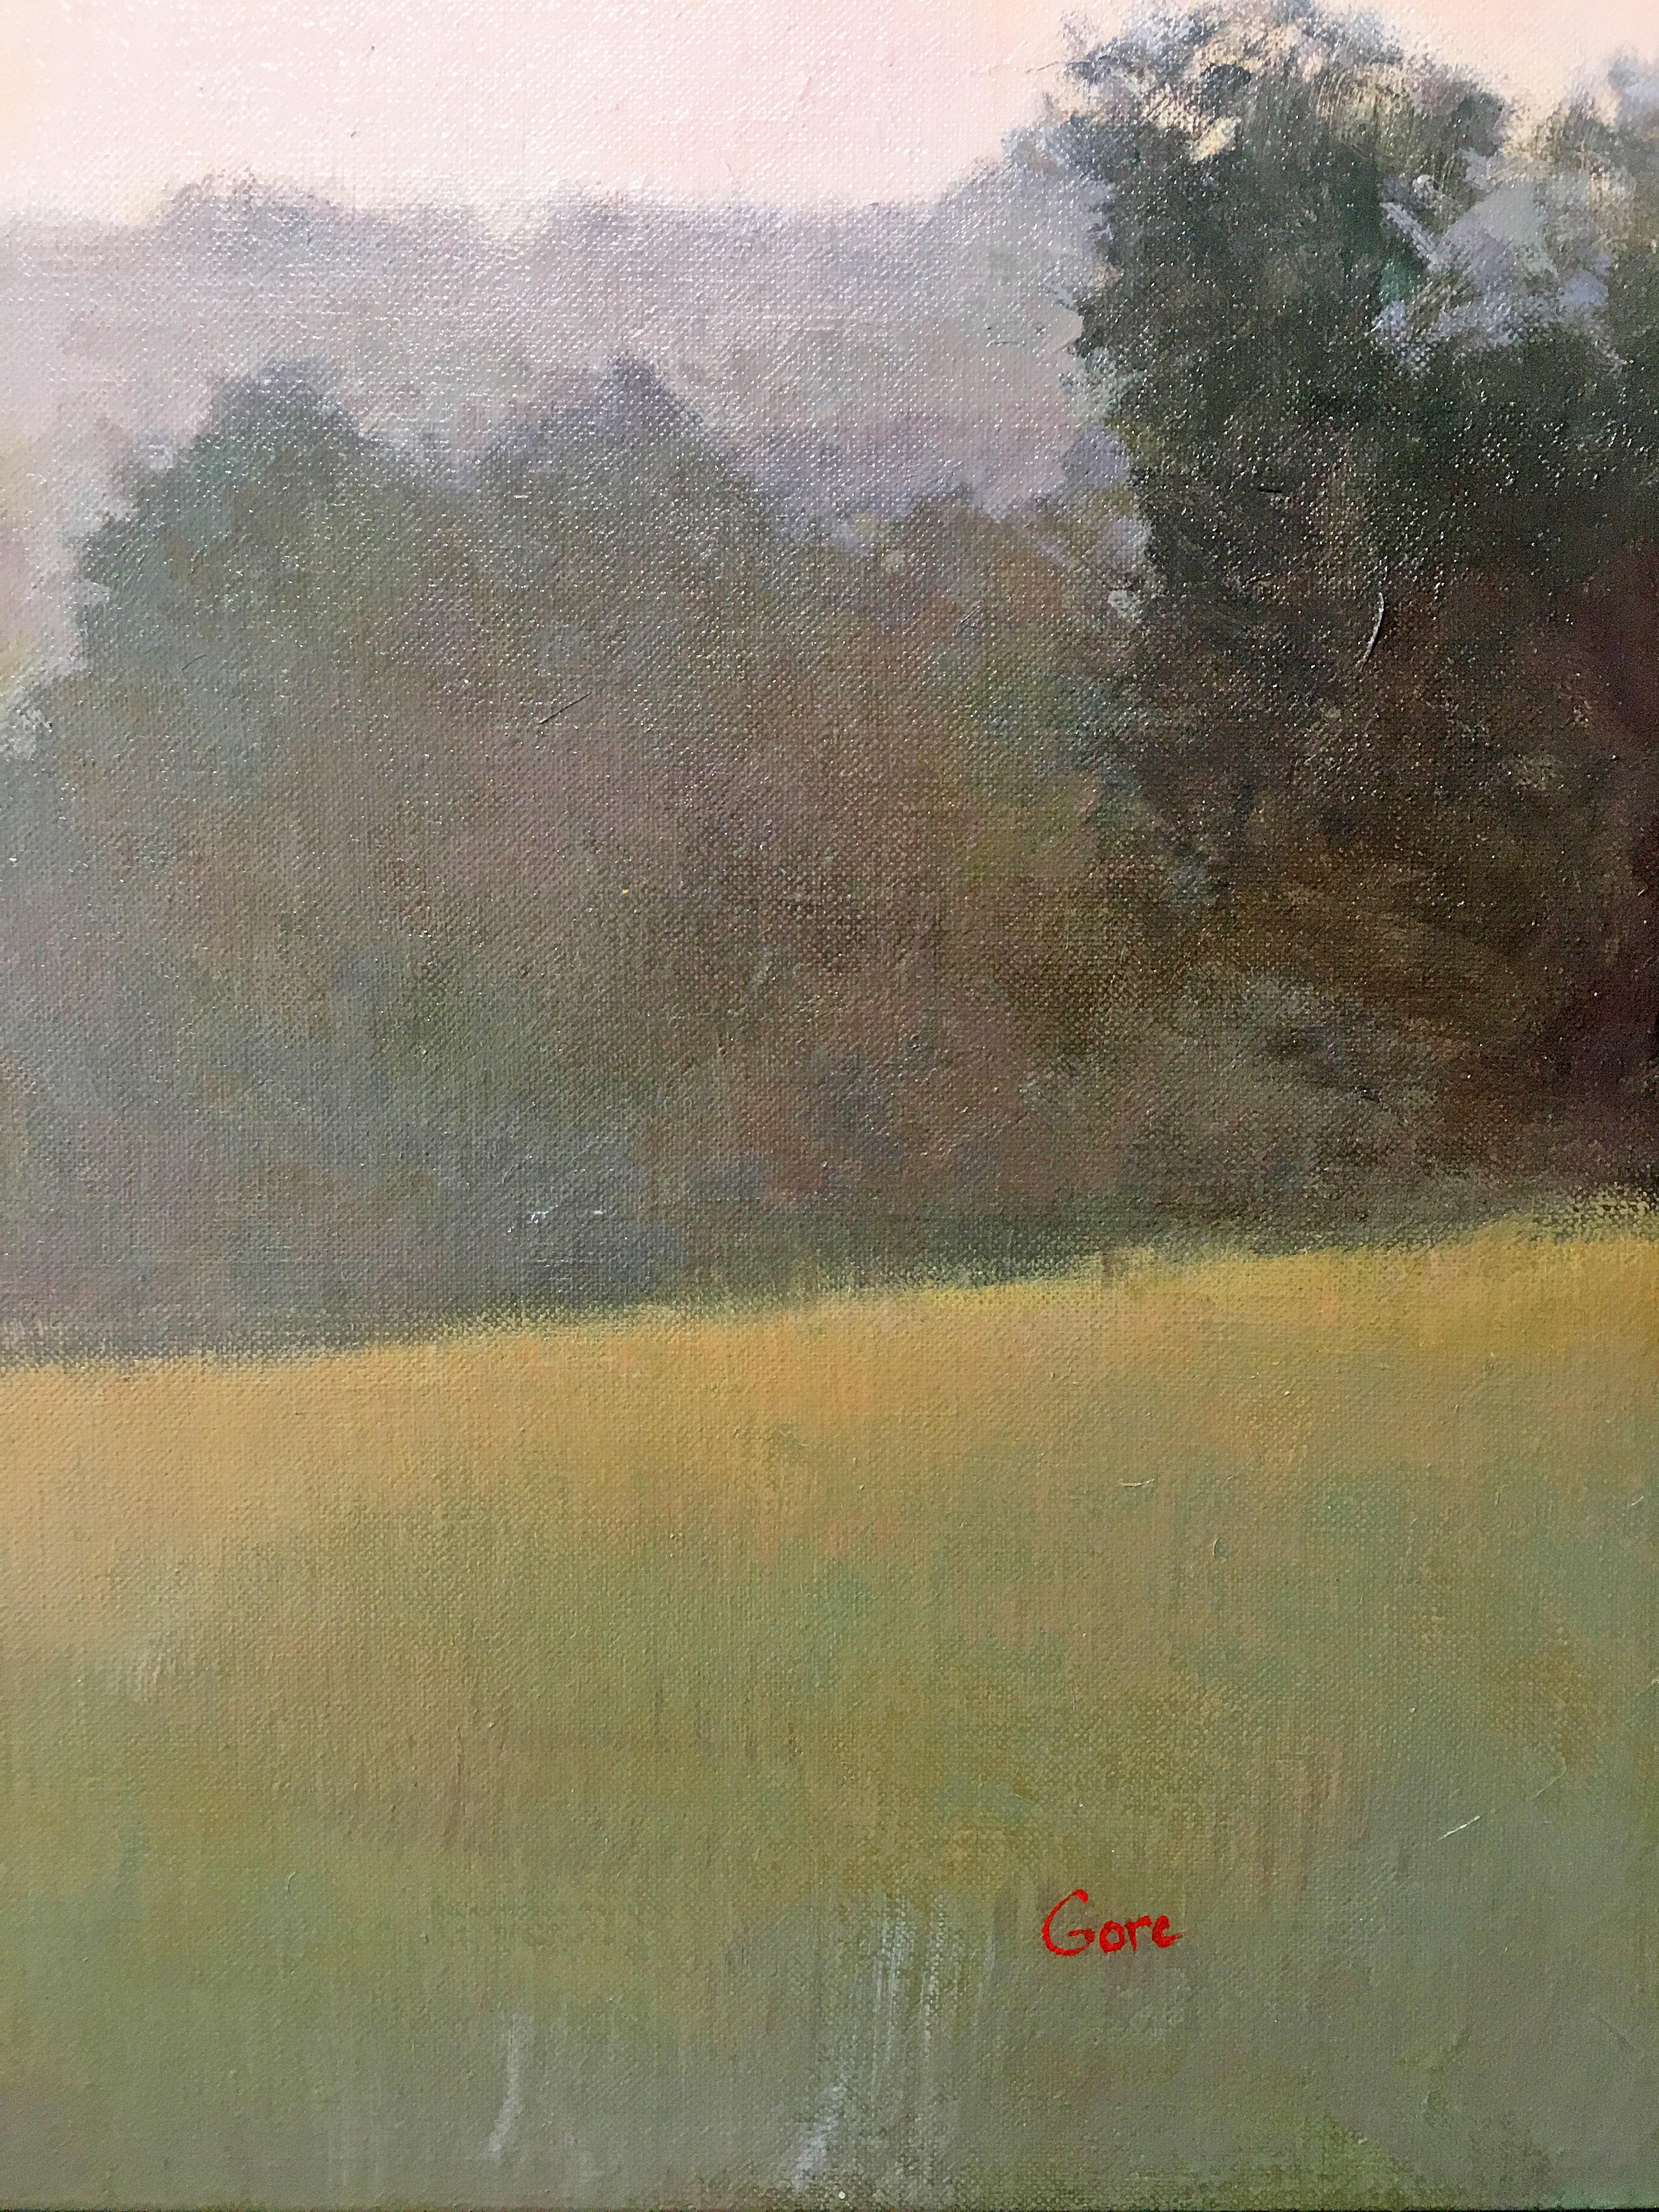 Quiet Memory 2 - Brown Landscape Painting by Elissa Gore